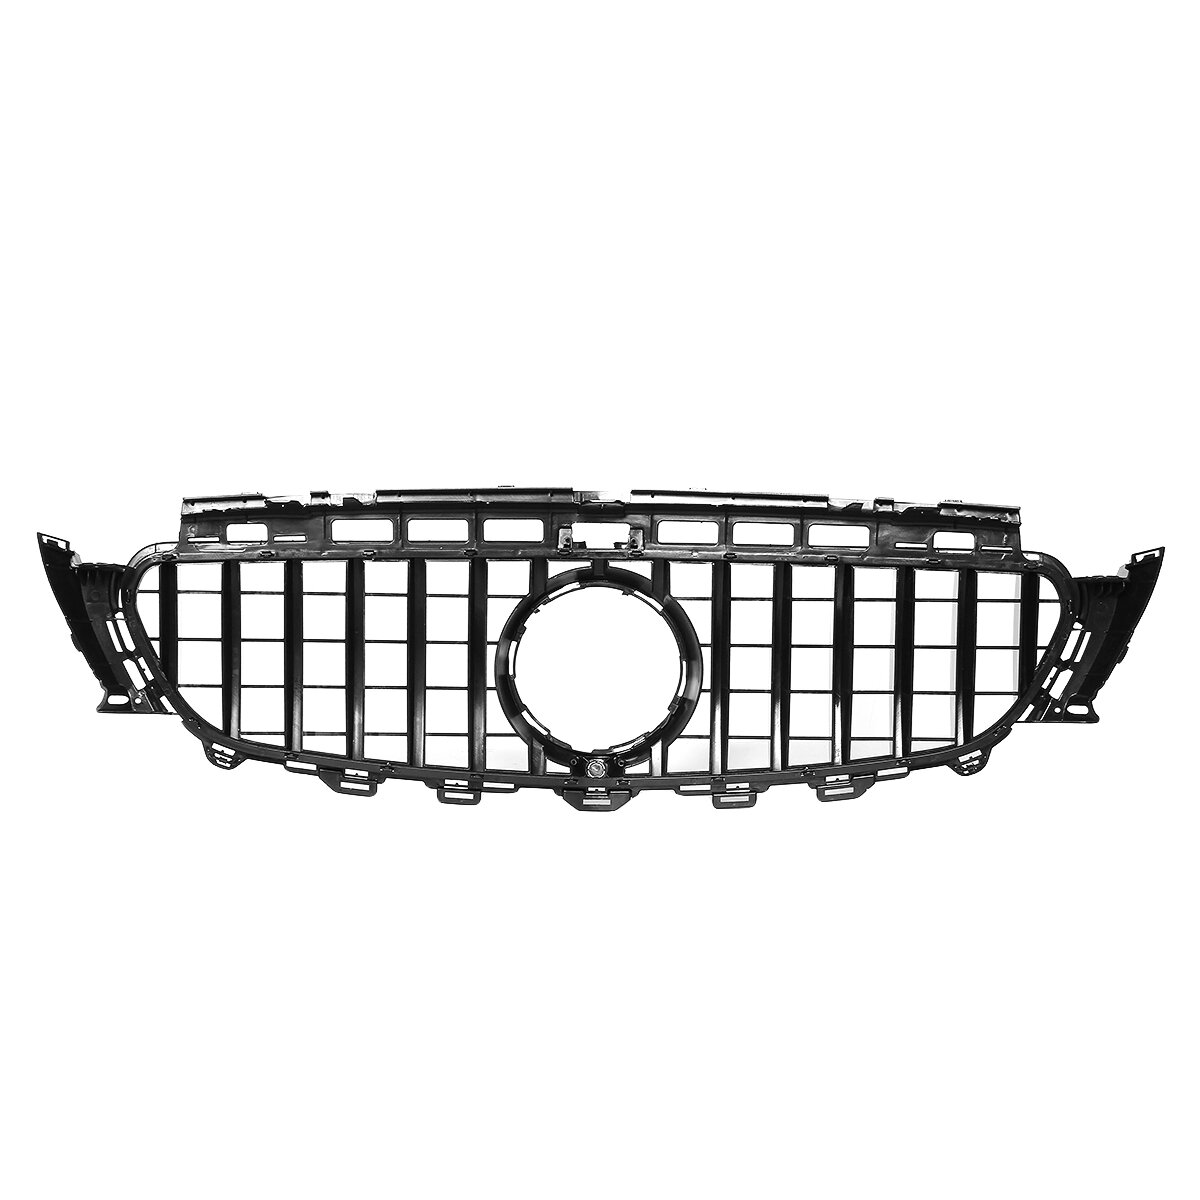 Glossy GTR Style Front Grill Voor Mercedes-Benz W213 E200 E300 E400 E43 AMG 2016-2018